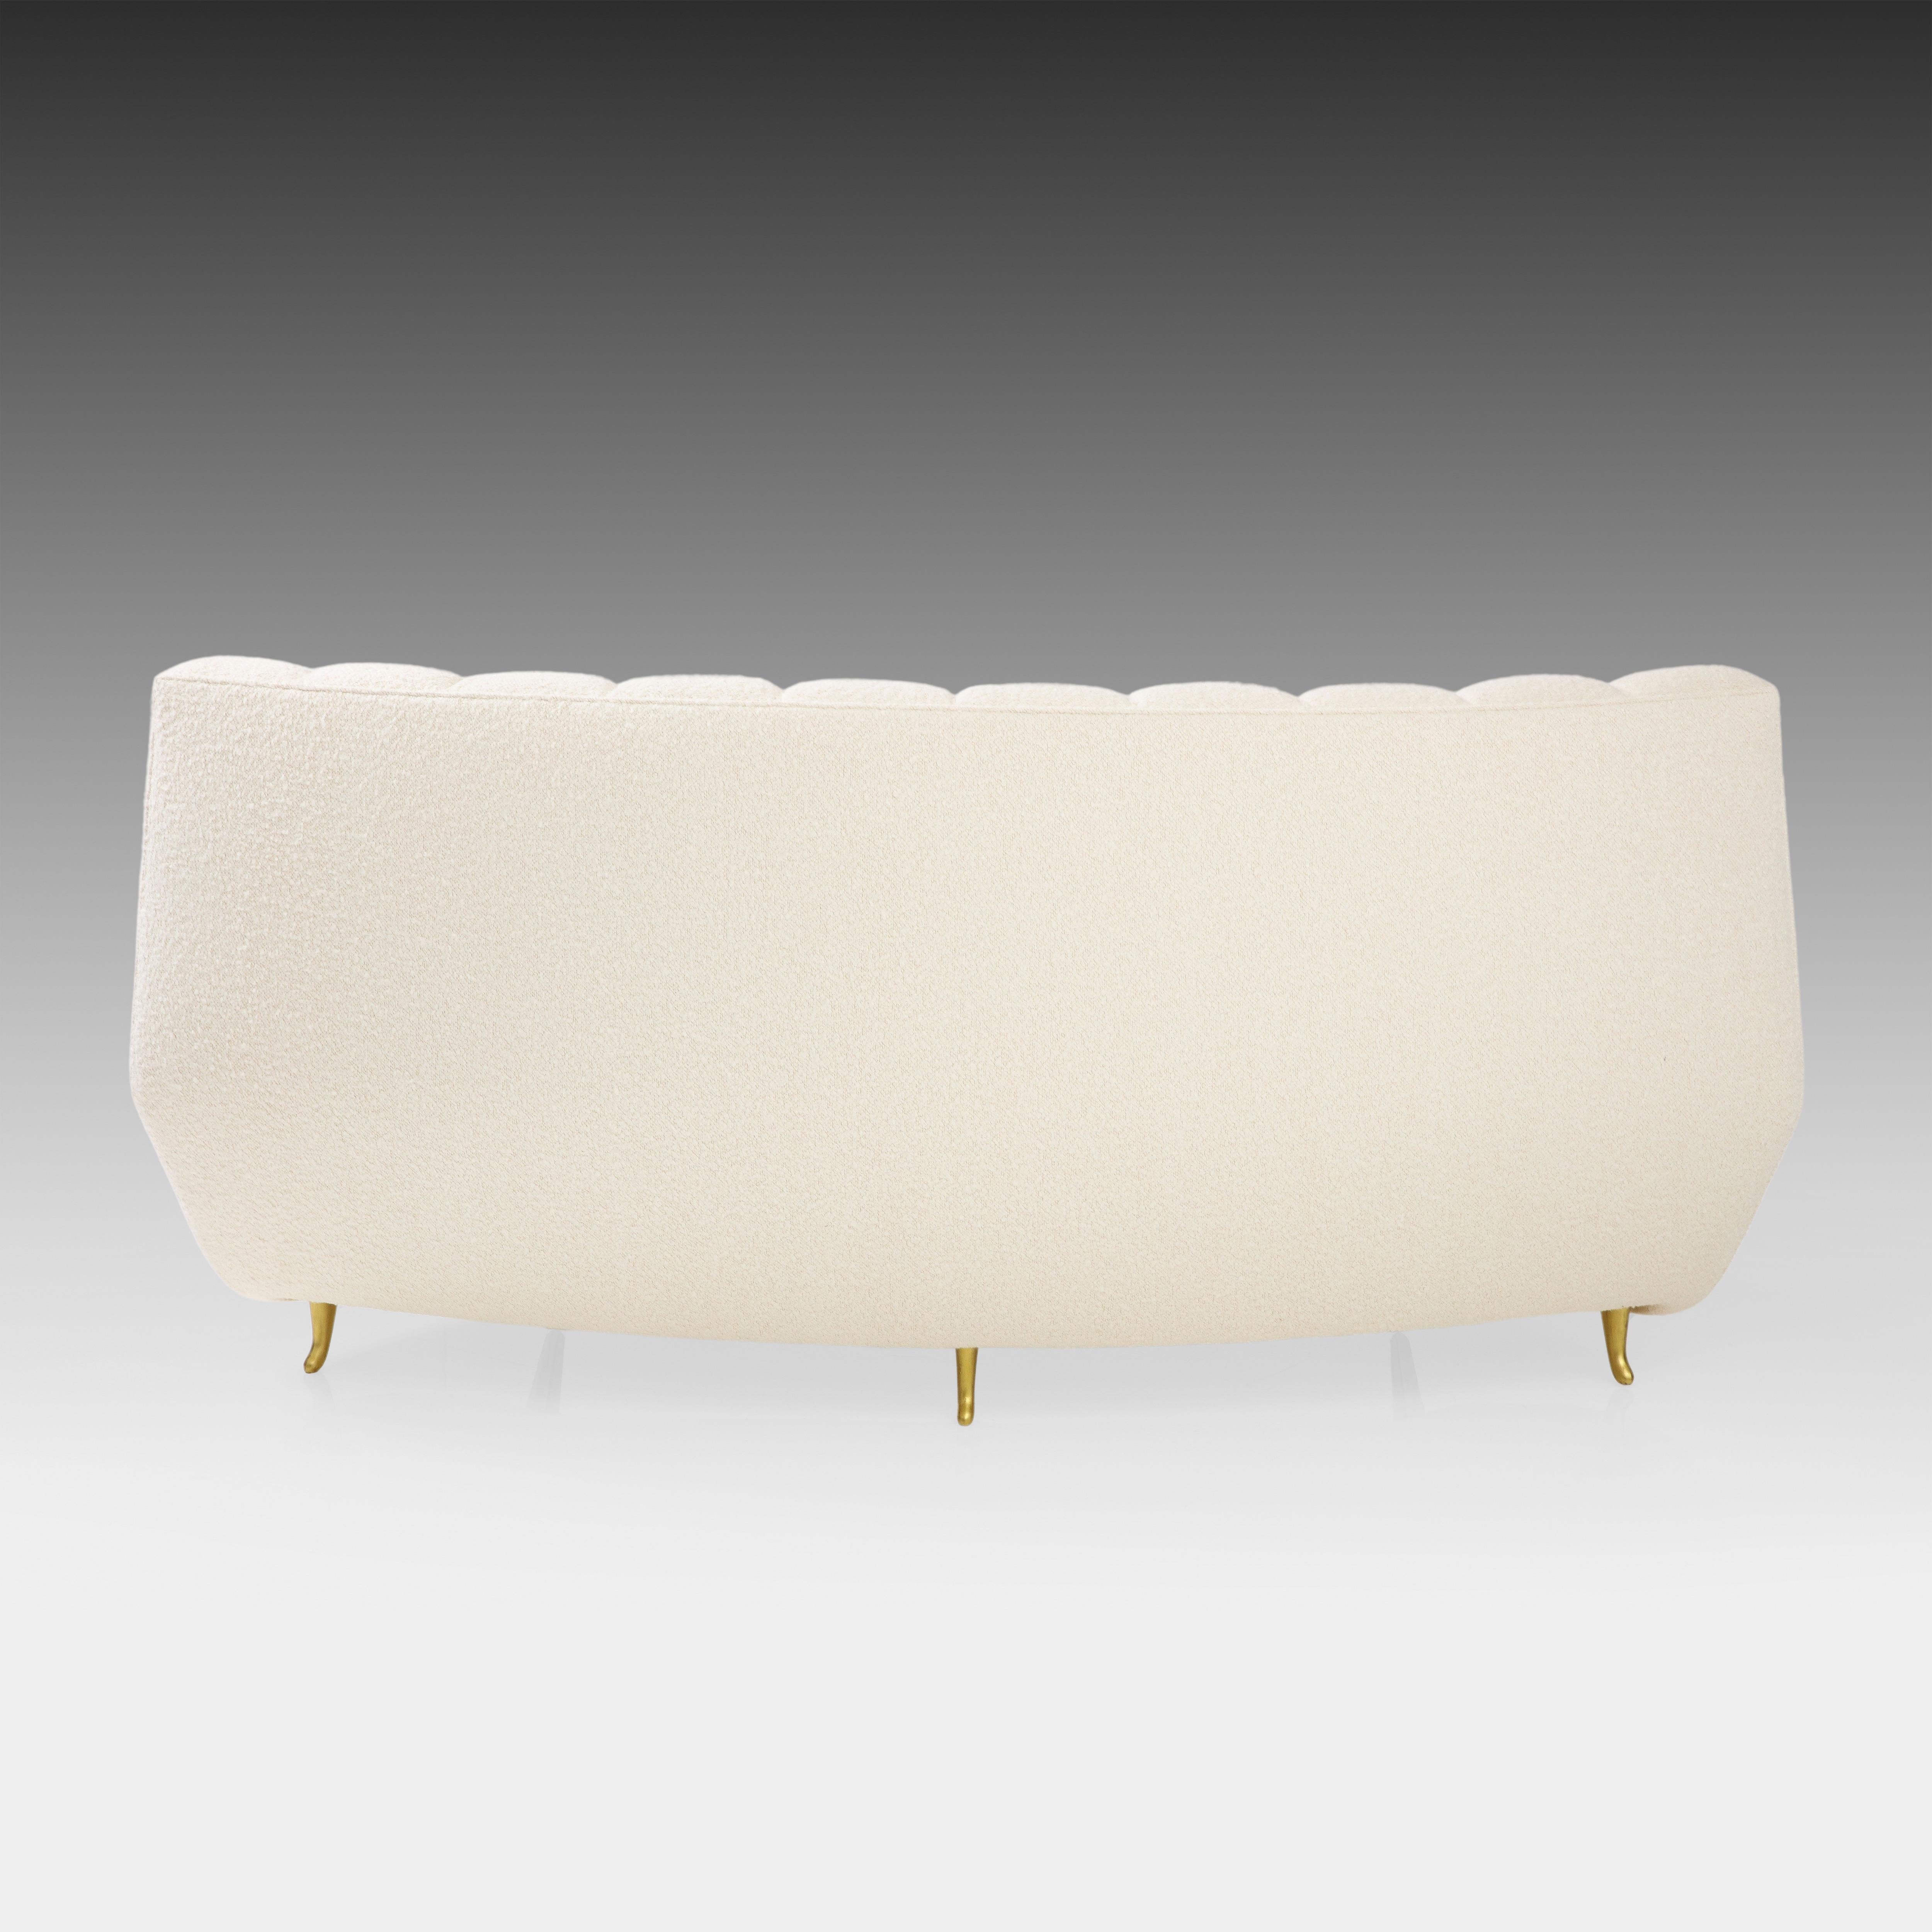 Metal ISA Bergamo Rare Curved Settee in Ivory Bouclé, Italy, 1950s For Sale